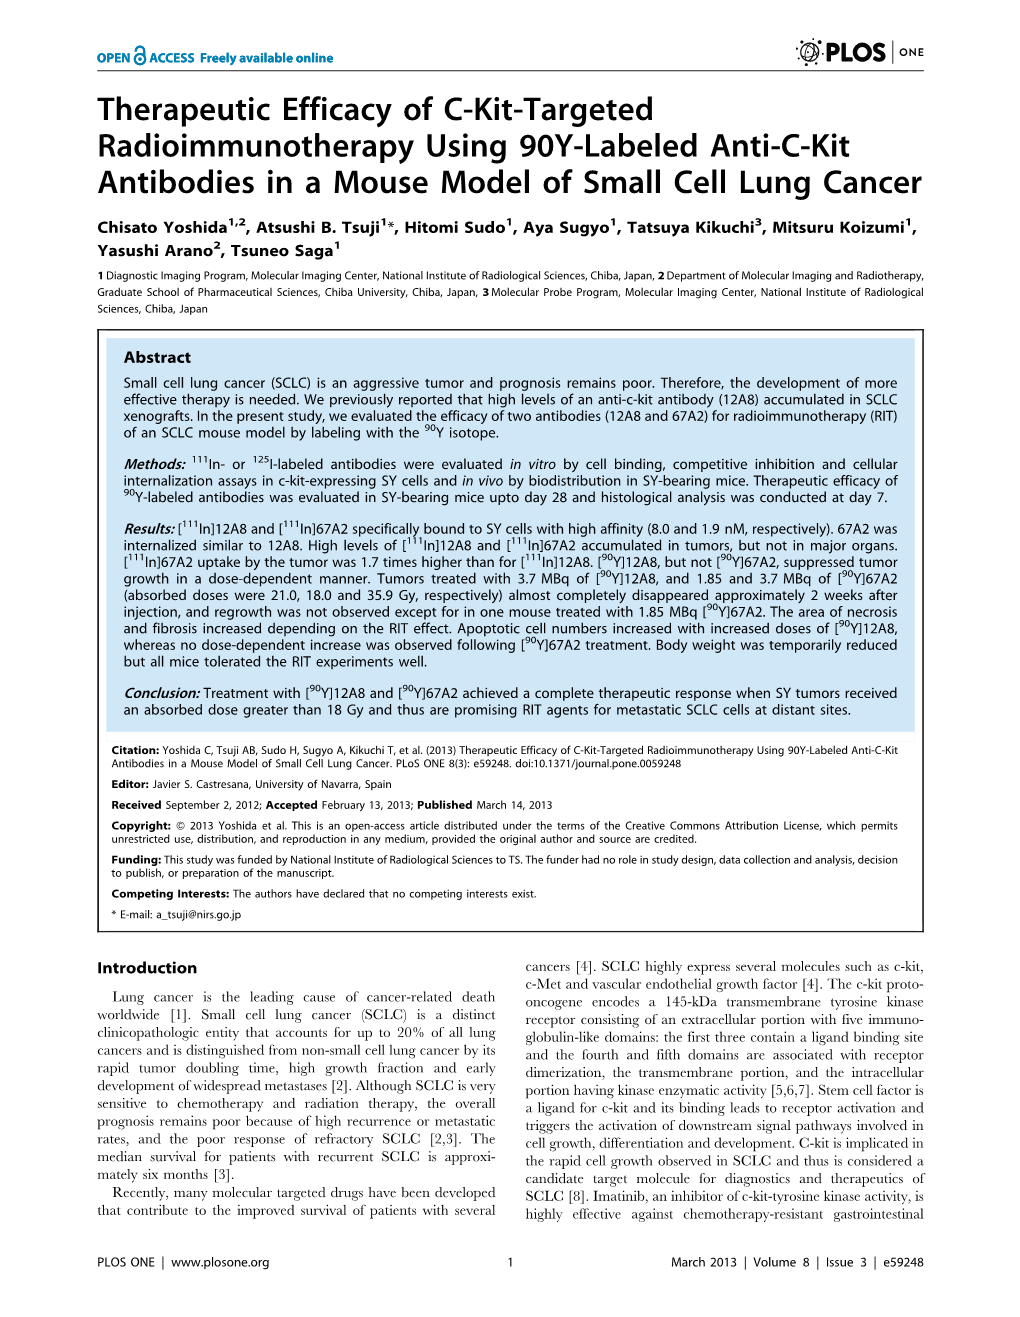 Therapeutic Efficacy of C-Kit-Targeted Radioimmunotherapy Using 90Y-Labeled Anti-C-Kit Antibodies in a Mouse Model of Small Cell Lung Cancer